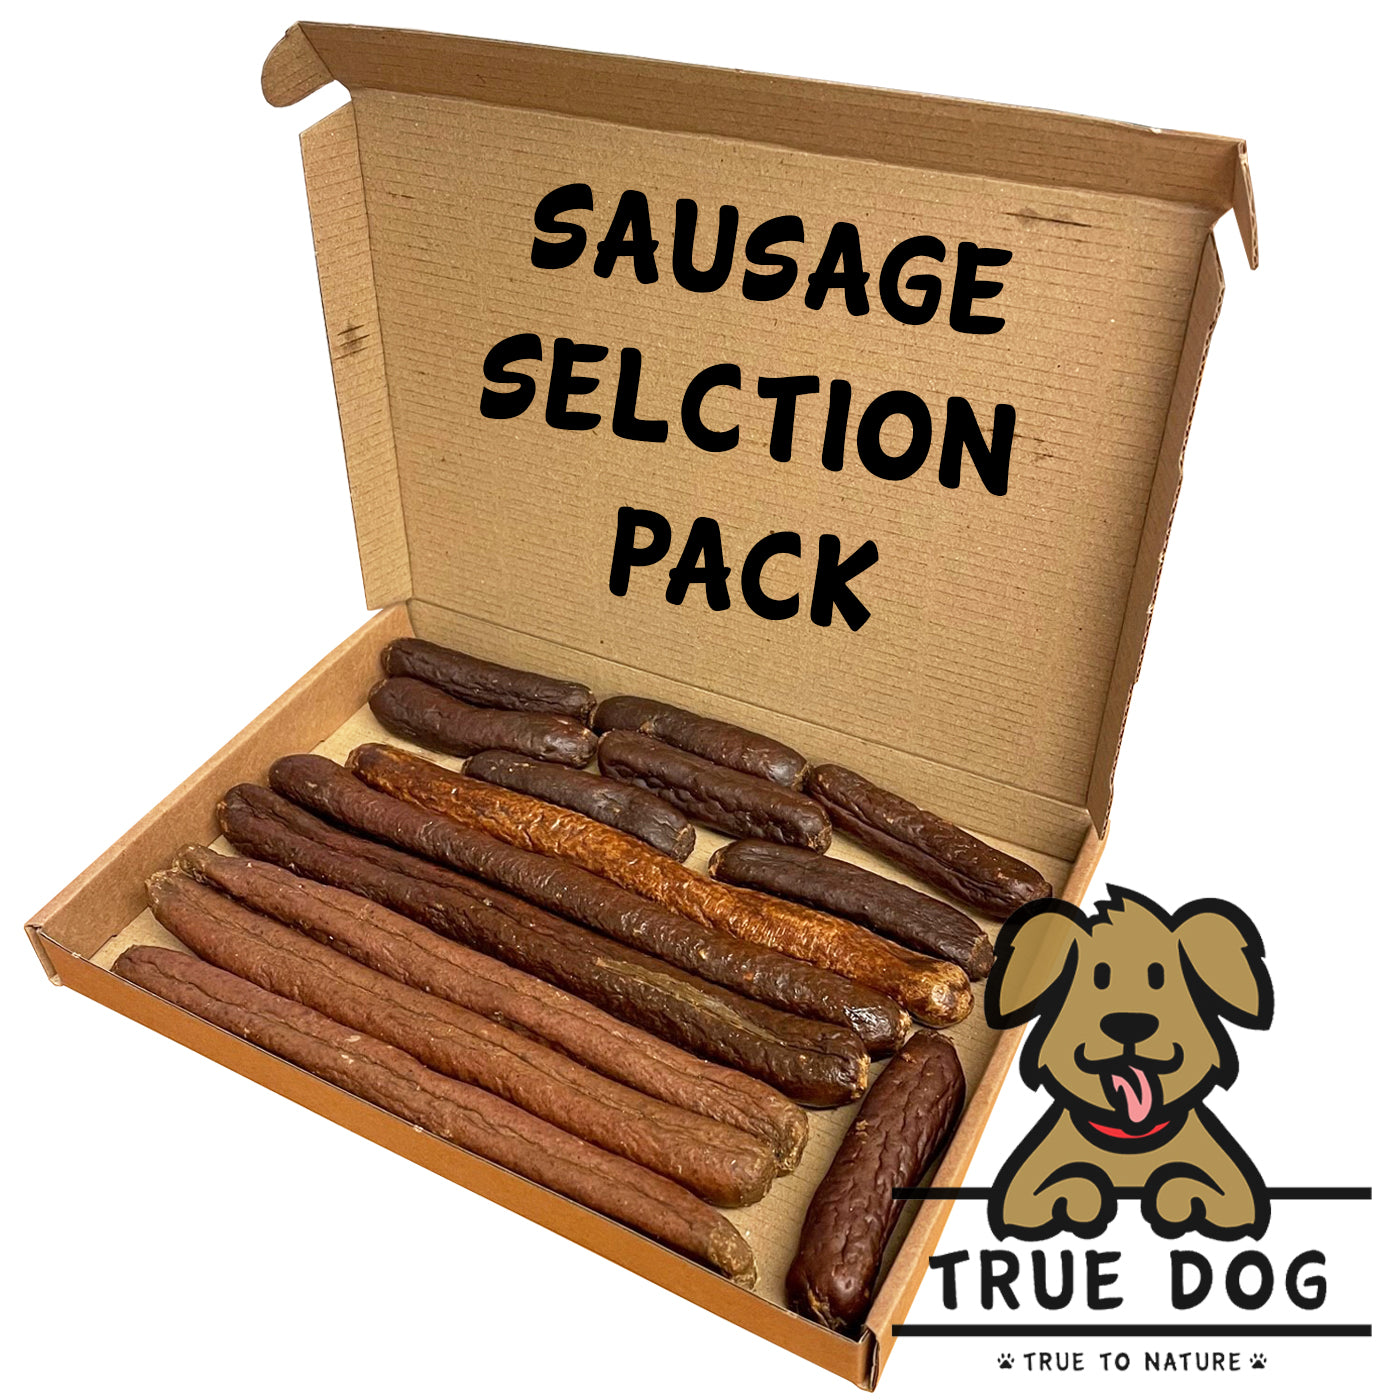 Sausage Selection Pack